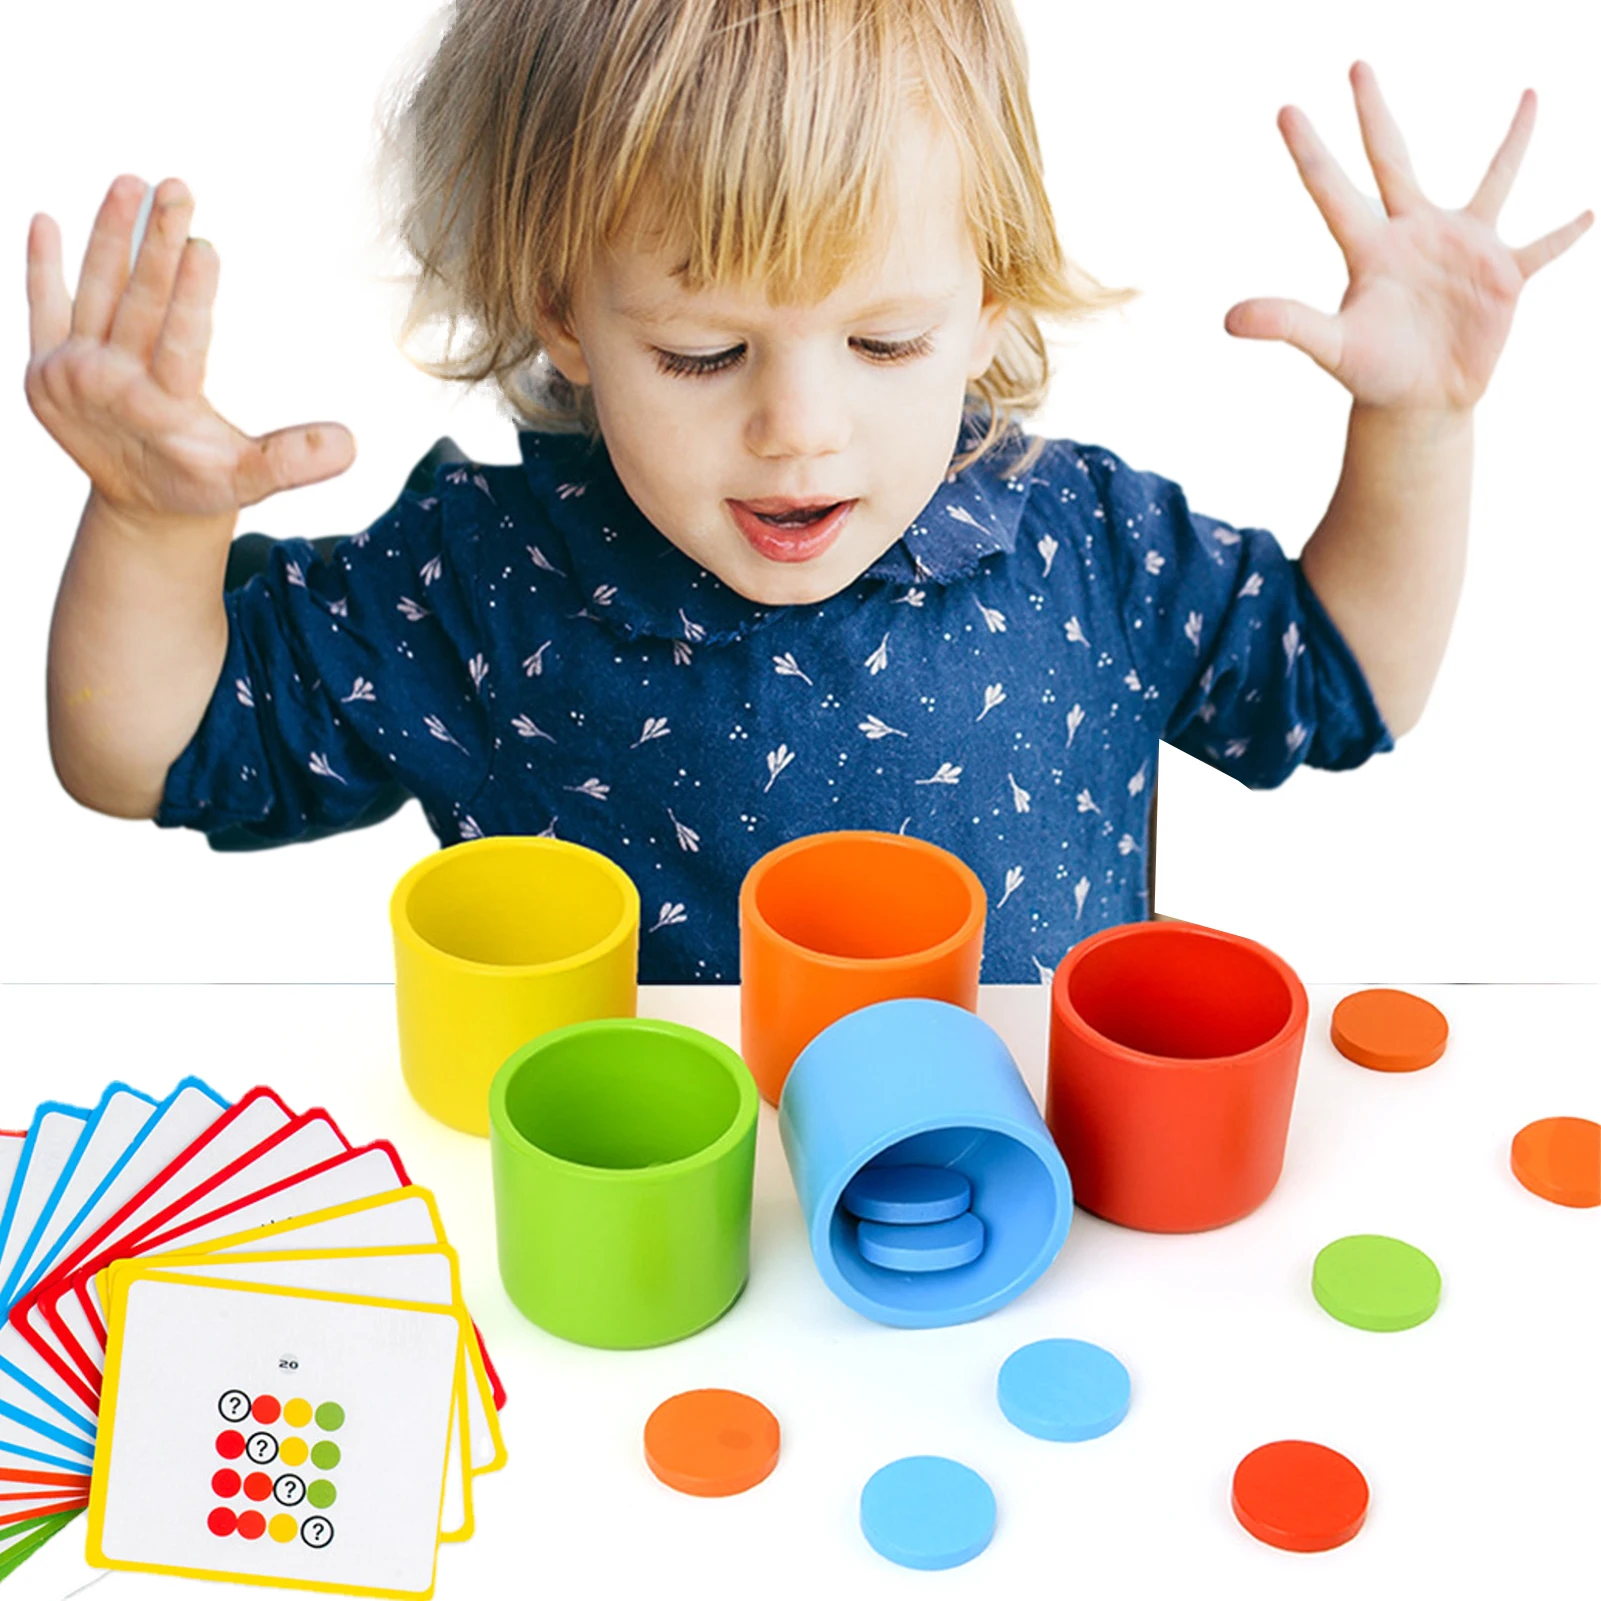 

Cups Starter Kit Montessori Toy Wooden Sorter Game 5 Cups Color Sorting And Counting Preschool Learning Education Sorting Cups